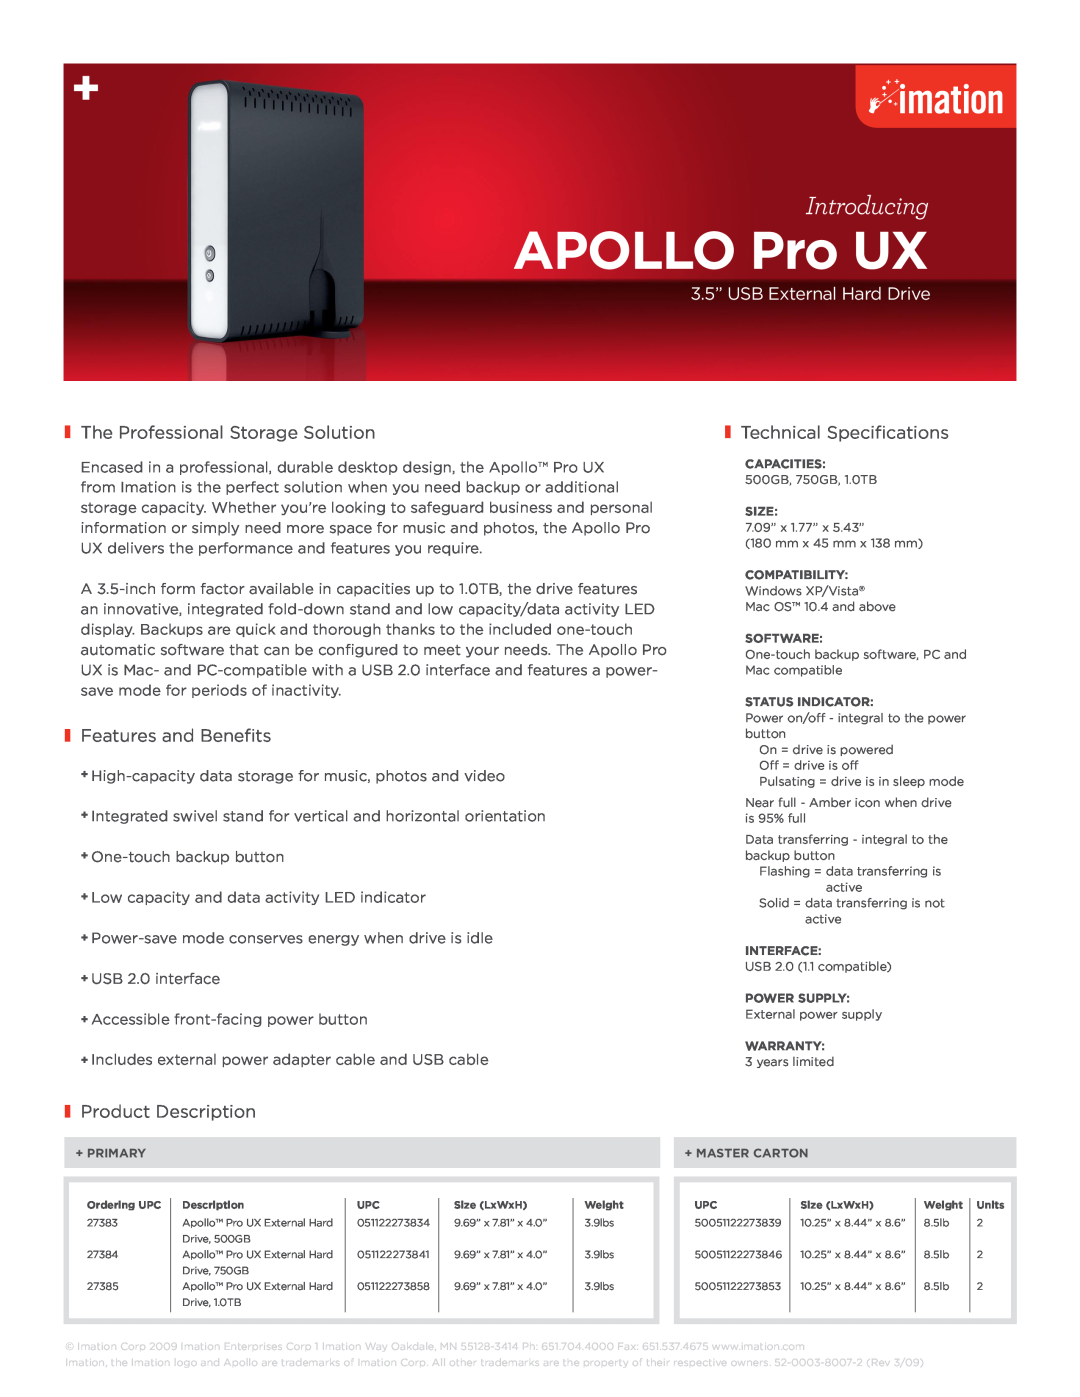 Imation manual apollo Pro UX, Introducing, 3.5” USB External Hard Drive, The Professional Storage Solution 